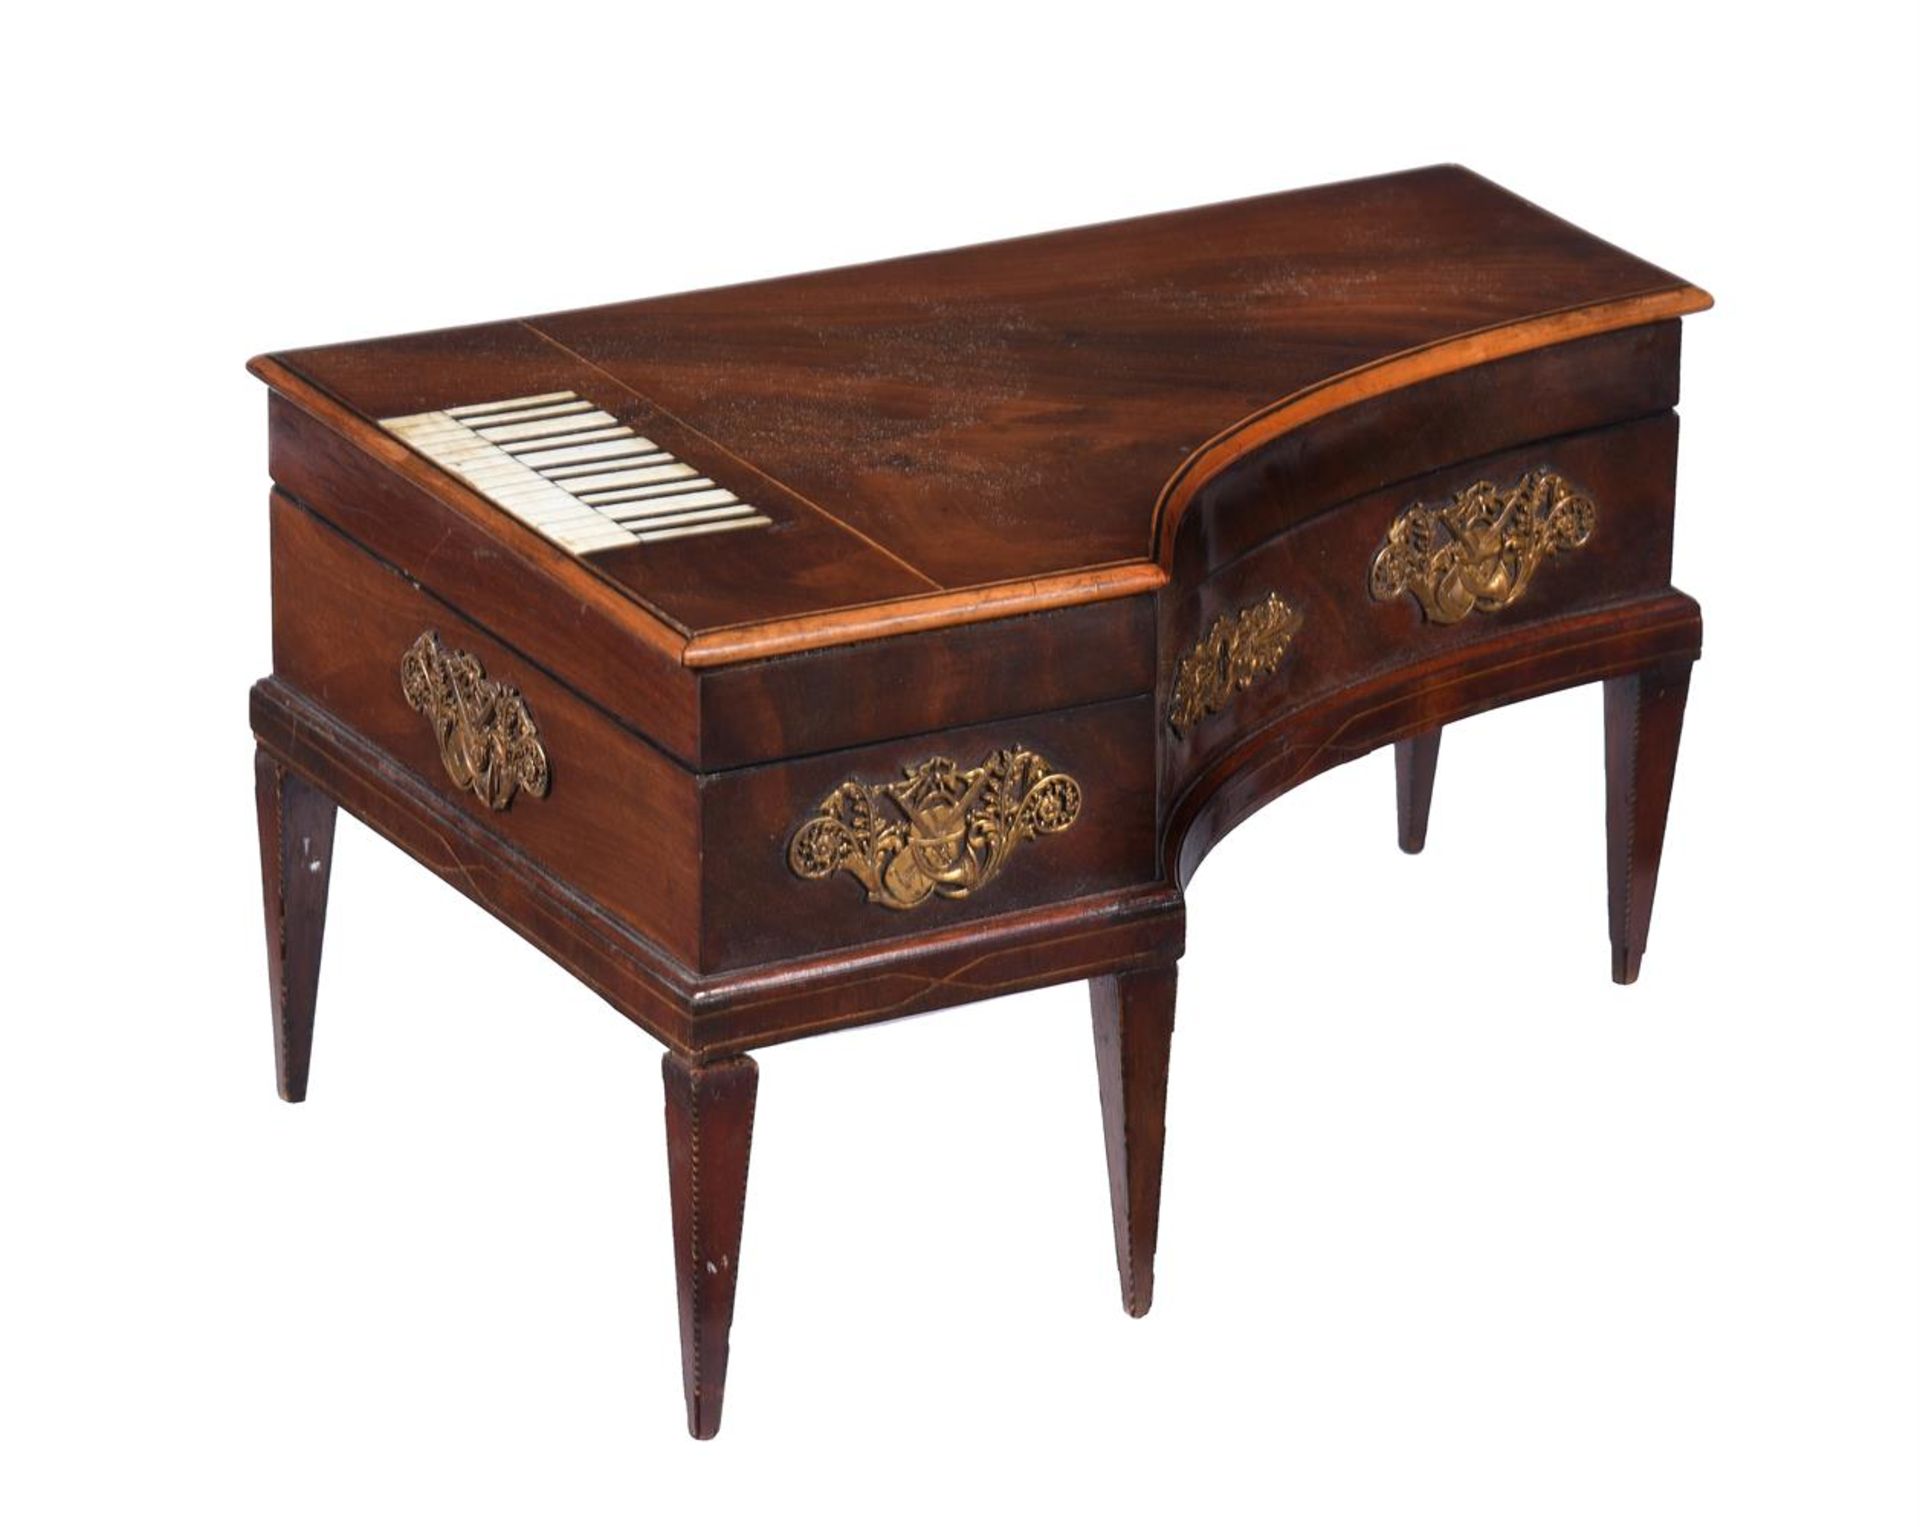 Y A PALAIS ROYALE MAHOGANY AND IVORY INLAID SEWING NECESSAIRE